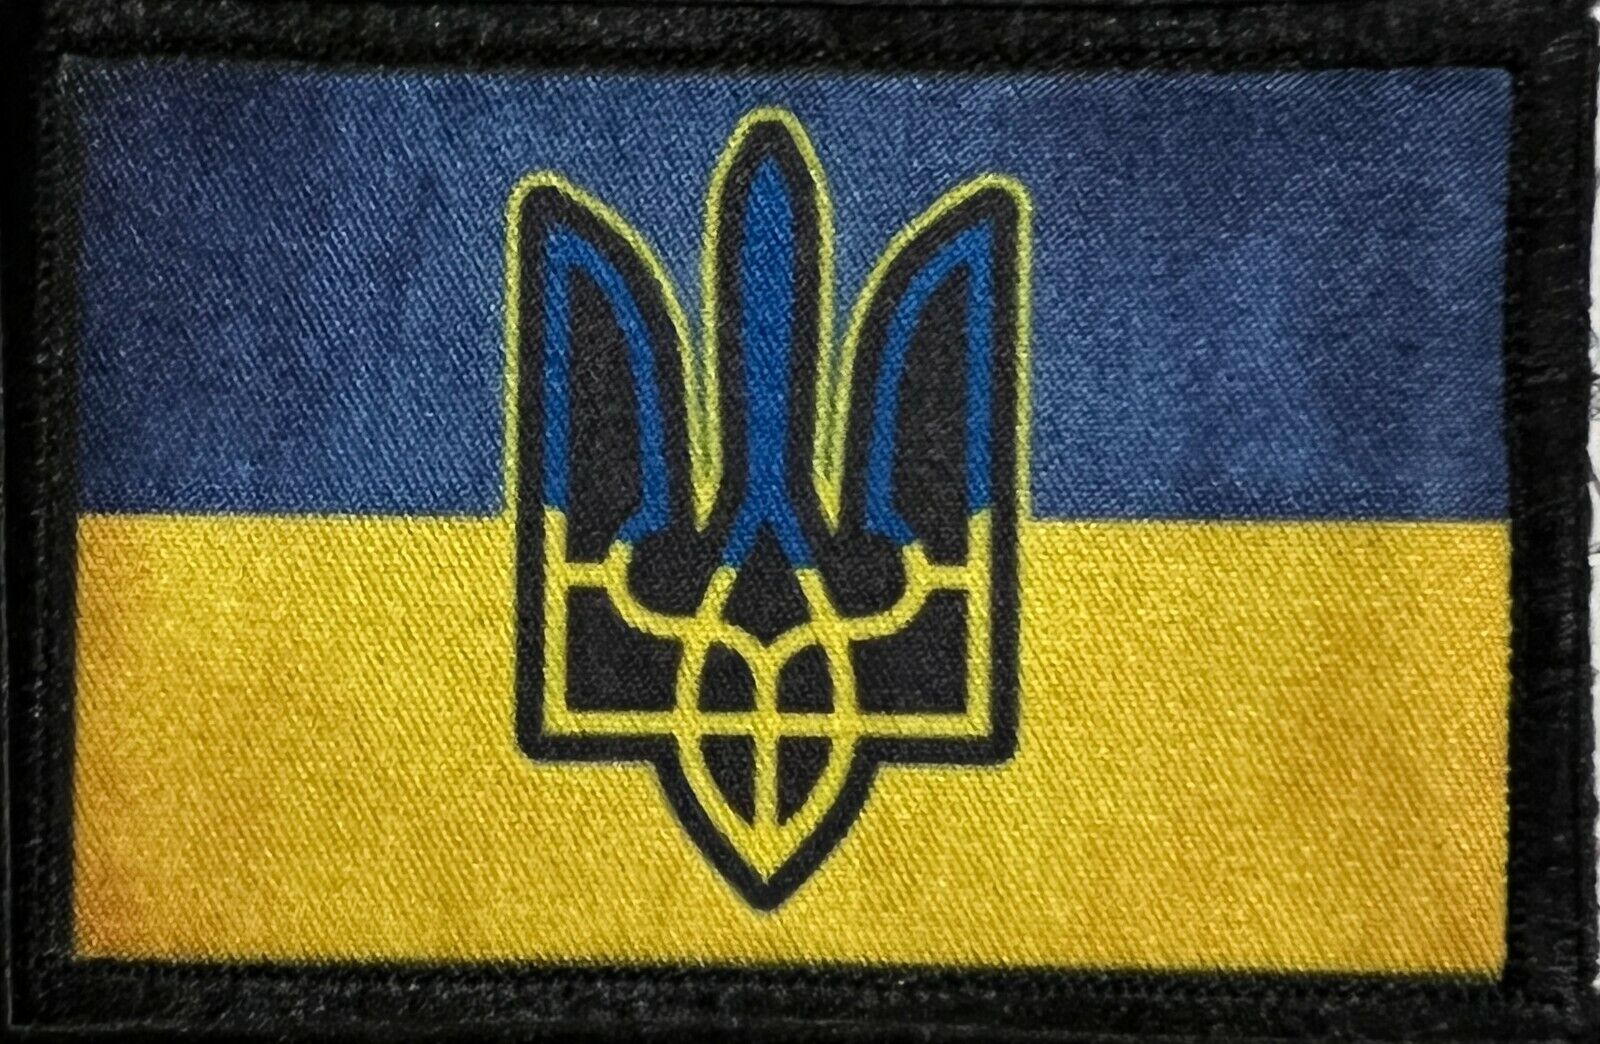 Full Color Ukrainian Coat of Arms Ukraine Morale Patch ARMY MILITARY Tactical